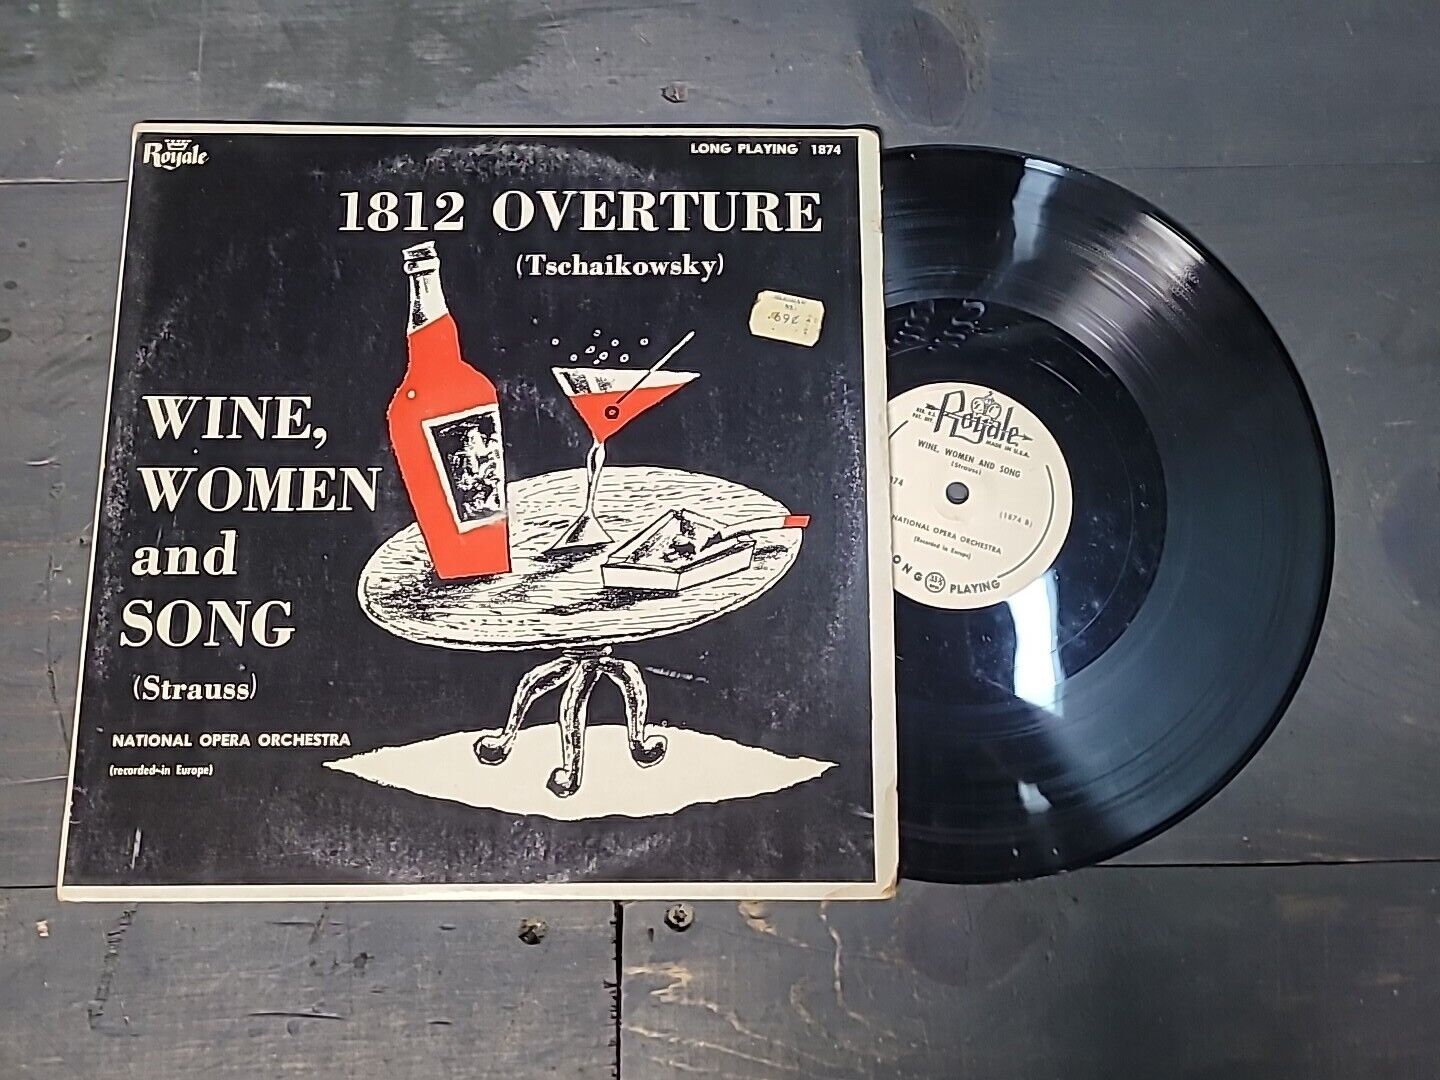 *Rare*Royale-Tchaikovsky -1812 Overture Long Play 1874 Wine Women And Song 33rpm